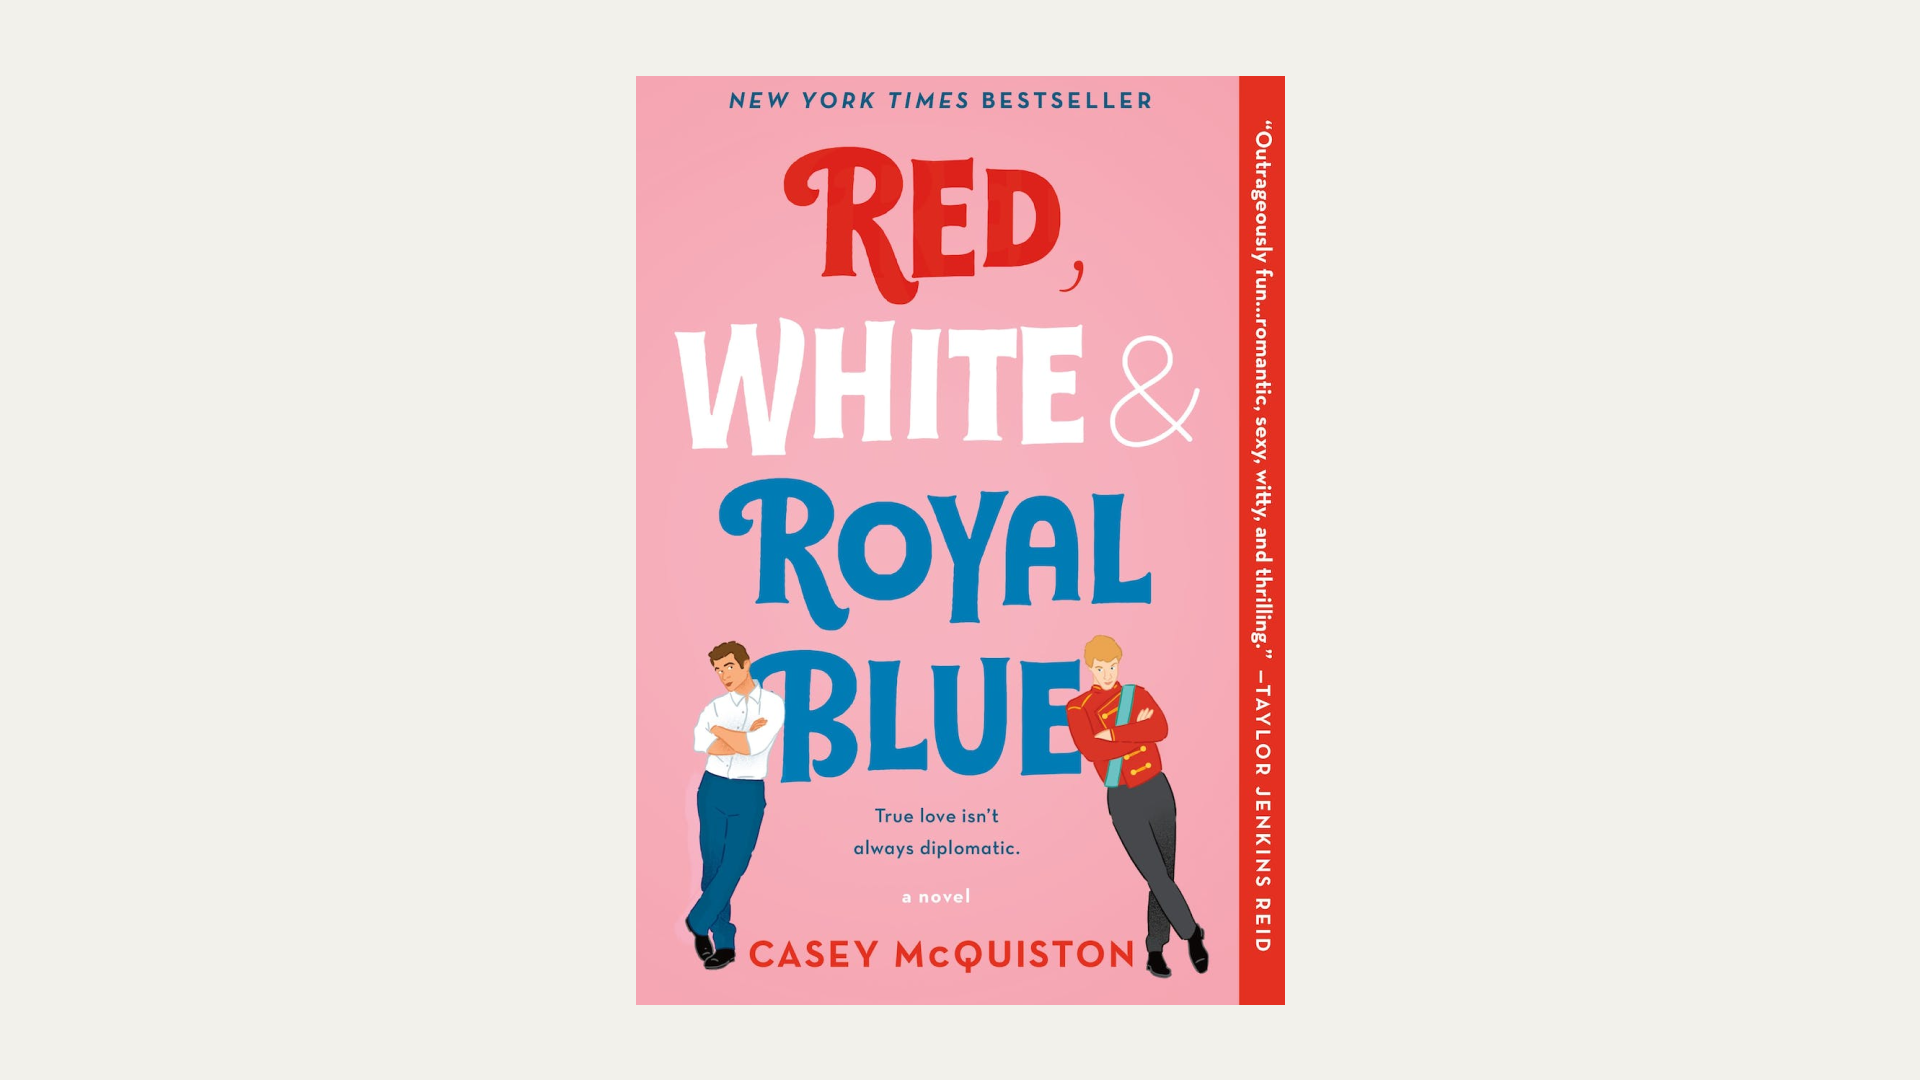 "Red, White & Royal Blue" by Casey McQuiston